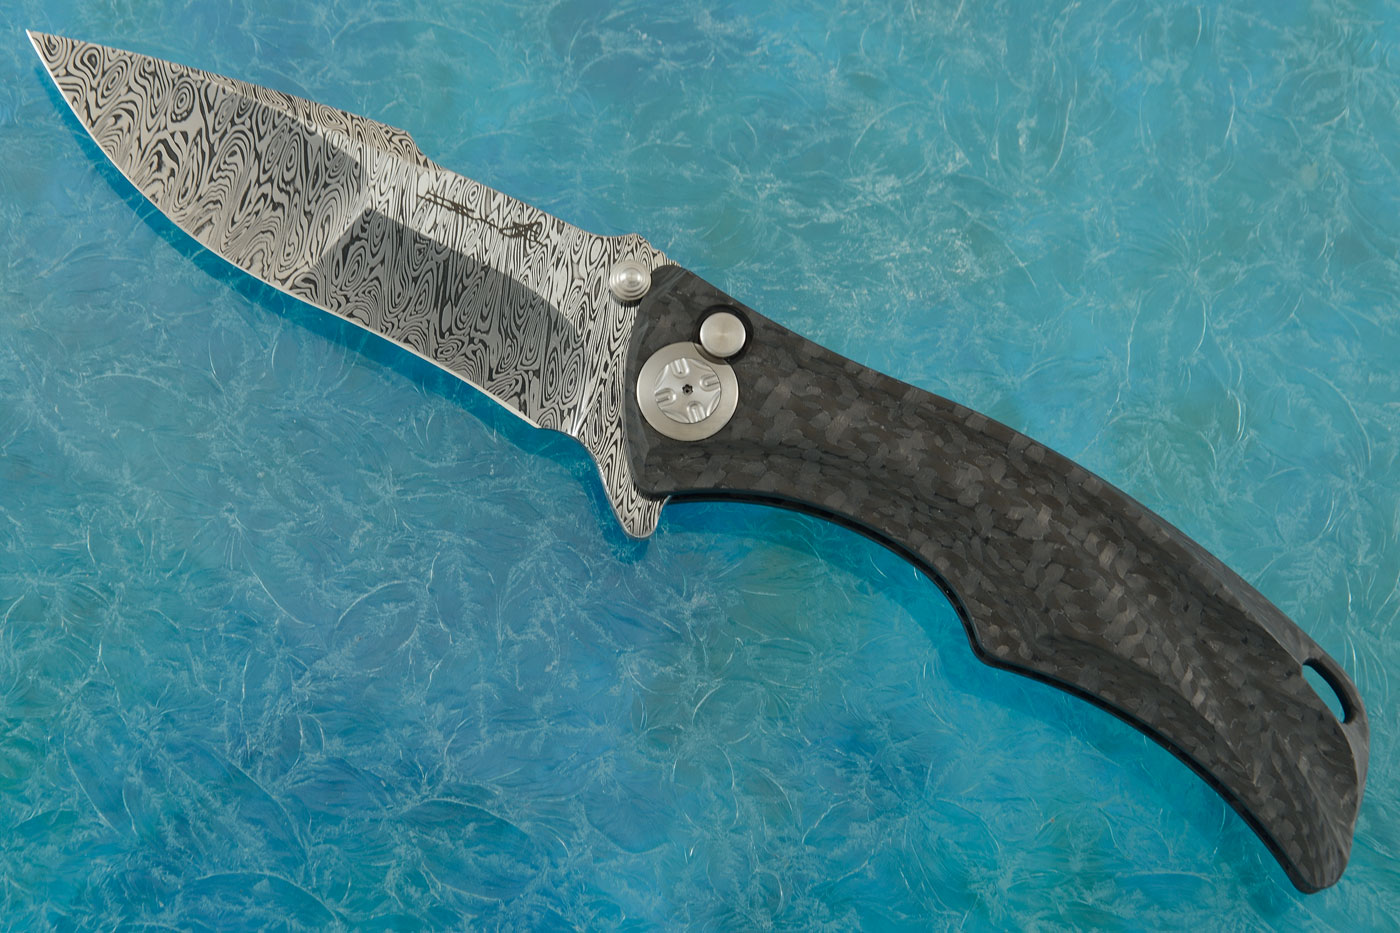 Tighe Down with Integral Carbon Fiber and Damasteel